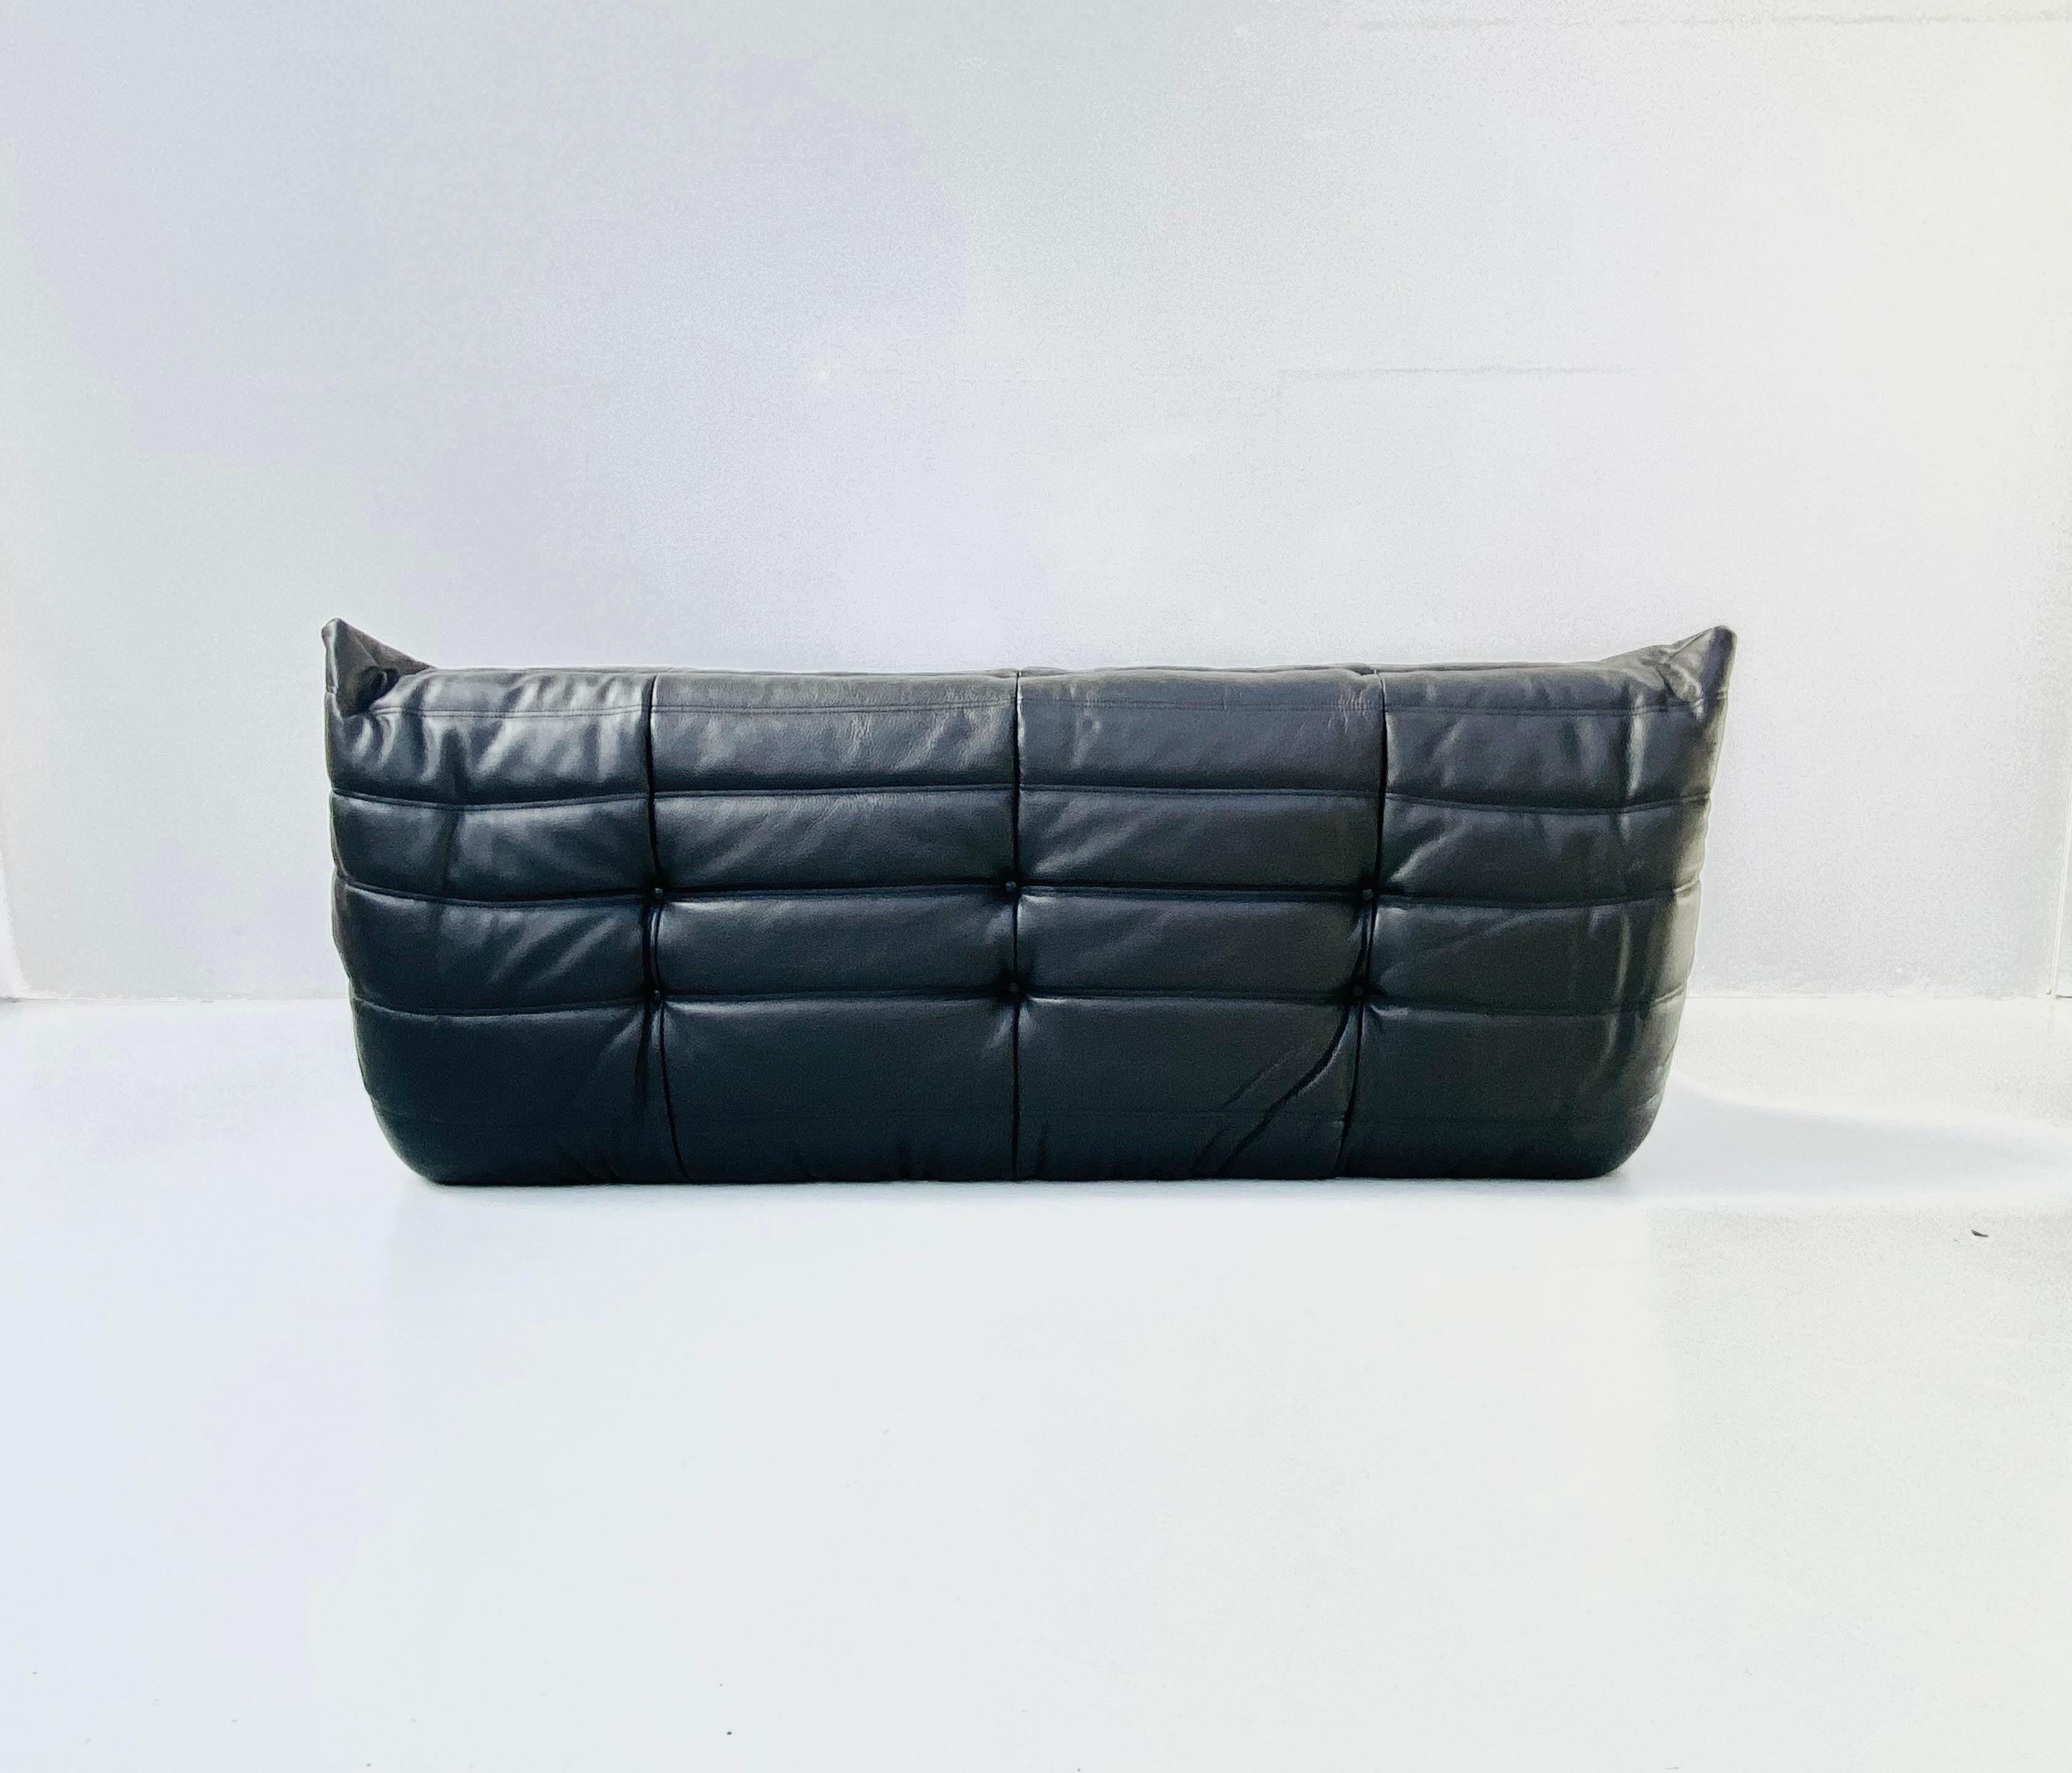 French Togo Sofa in Black Leather by Michel Ducaroy for Ligne Roset. For Sale 3